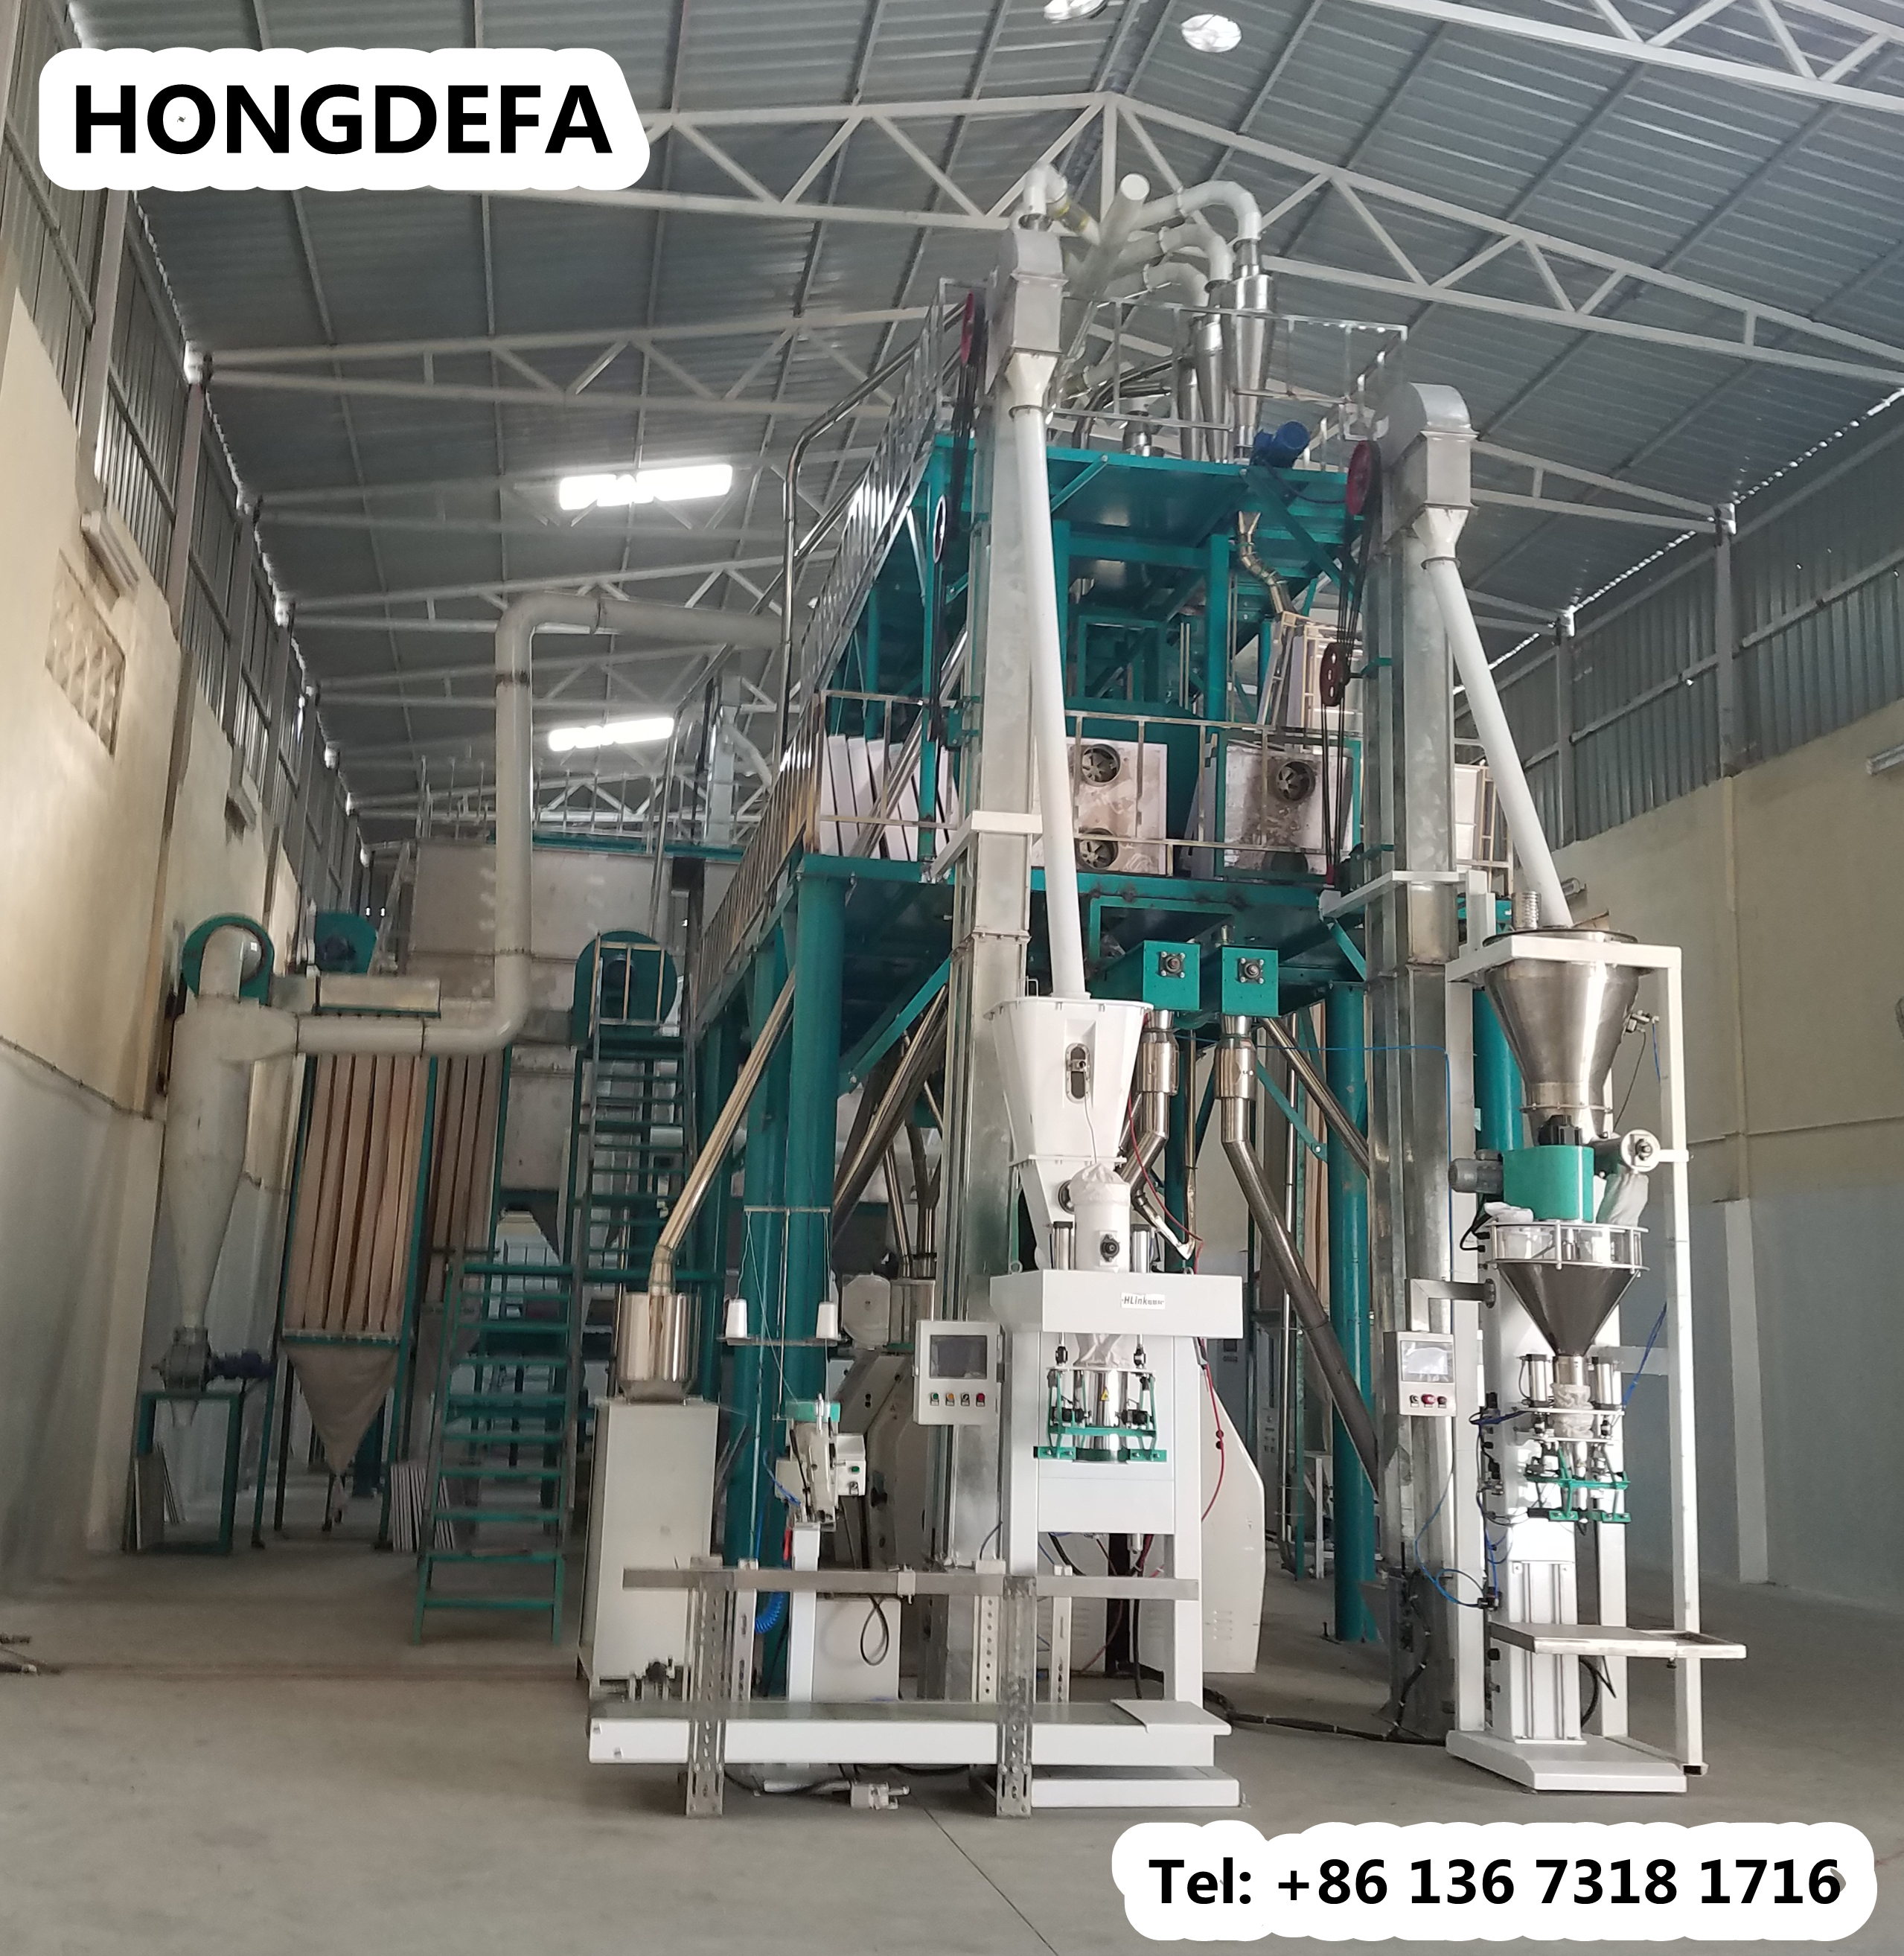 New project 50t per day maize mill is installing in Angola !